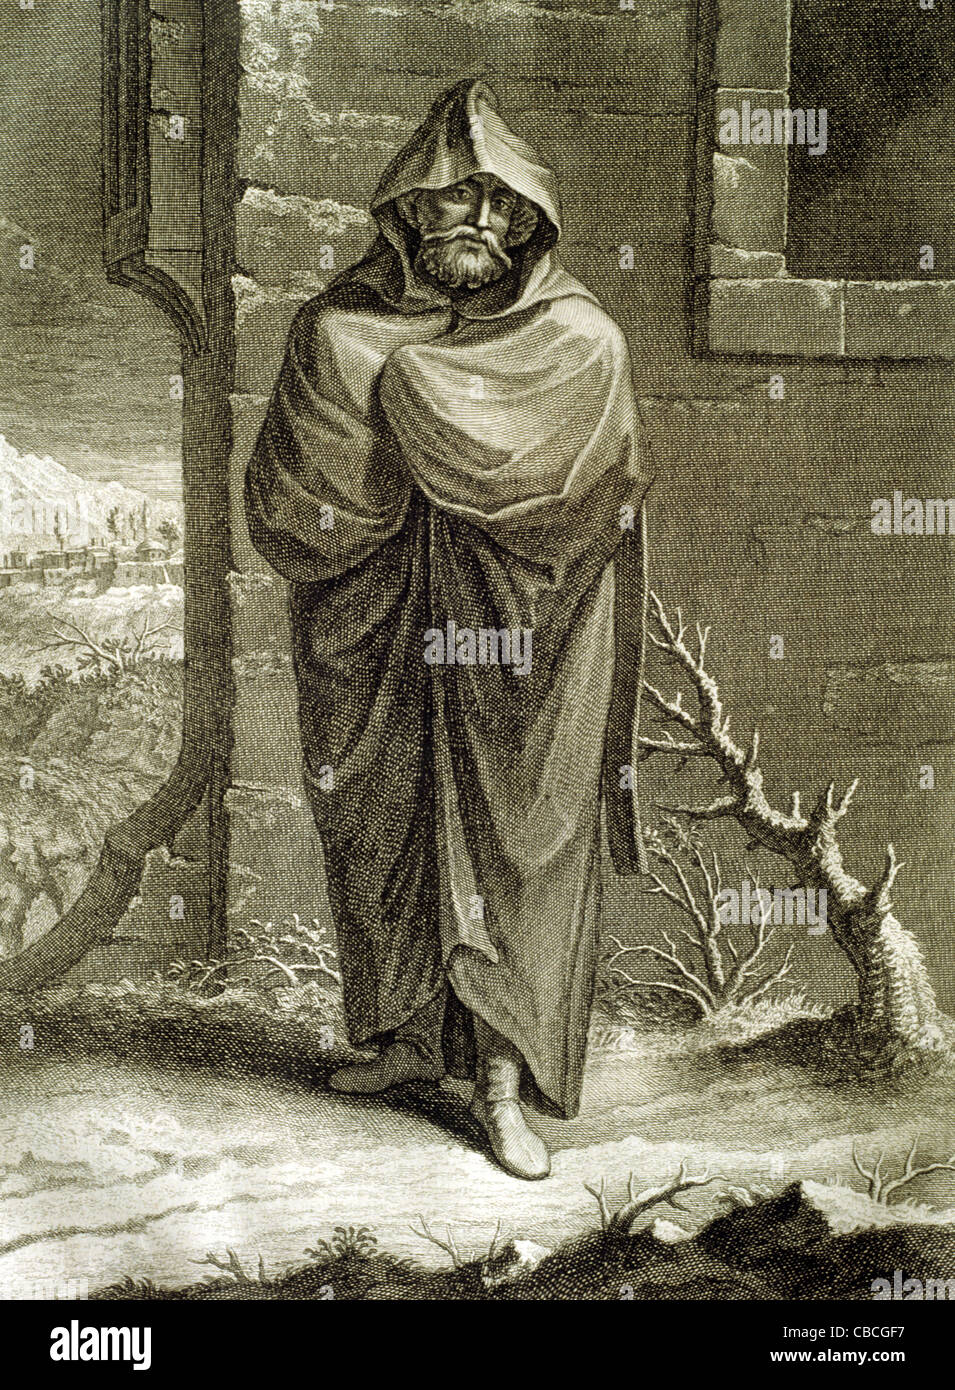 Ottoman Turk or Turkish Man in Winter Costume or Cloak. Copper Engraving or Illustration 1712-13 by Jean-Baptiste Vanmour. Stock Photo